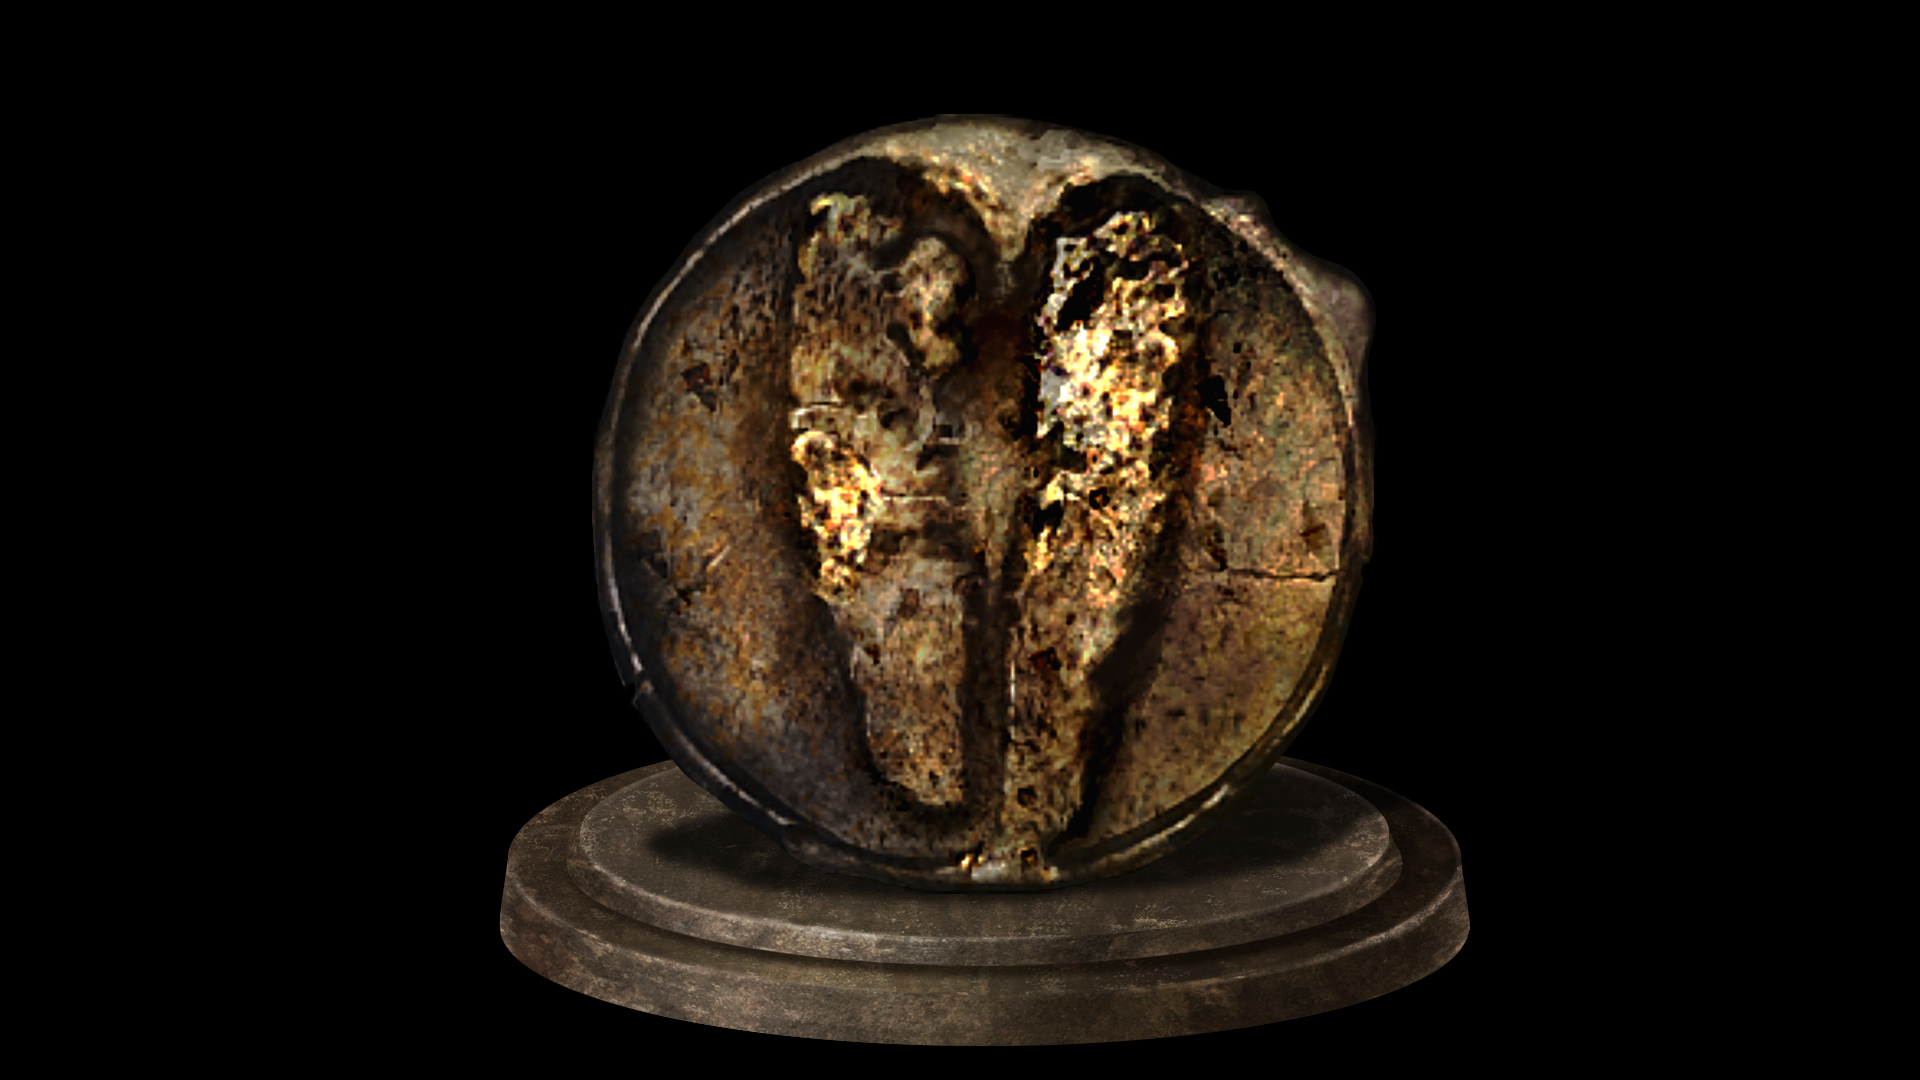 Icon for Gnawing Covenant